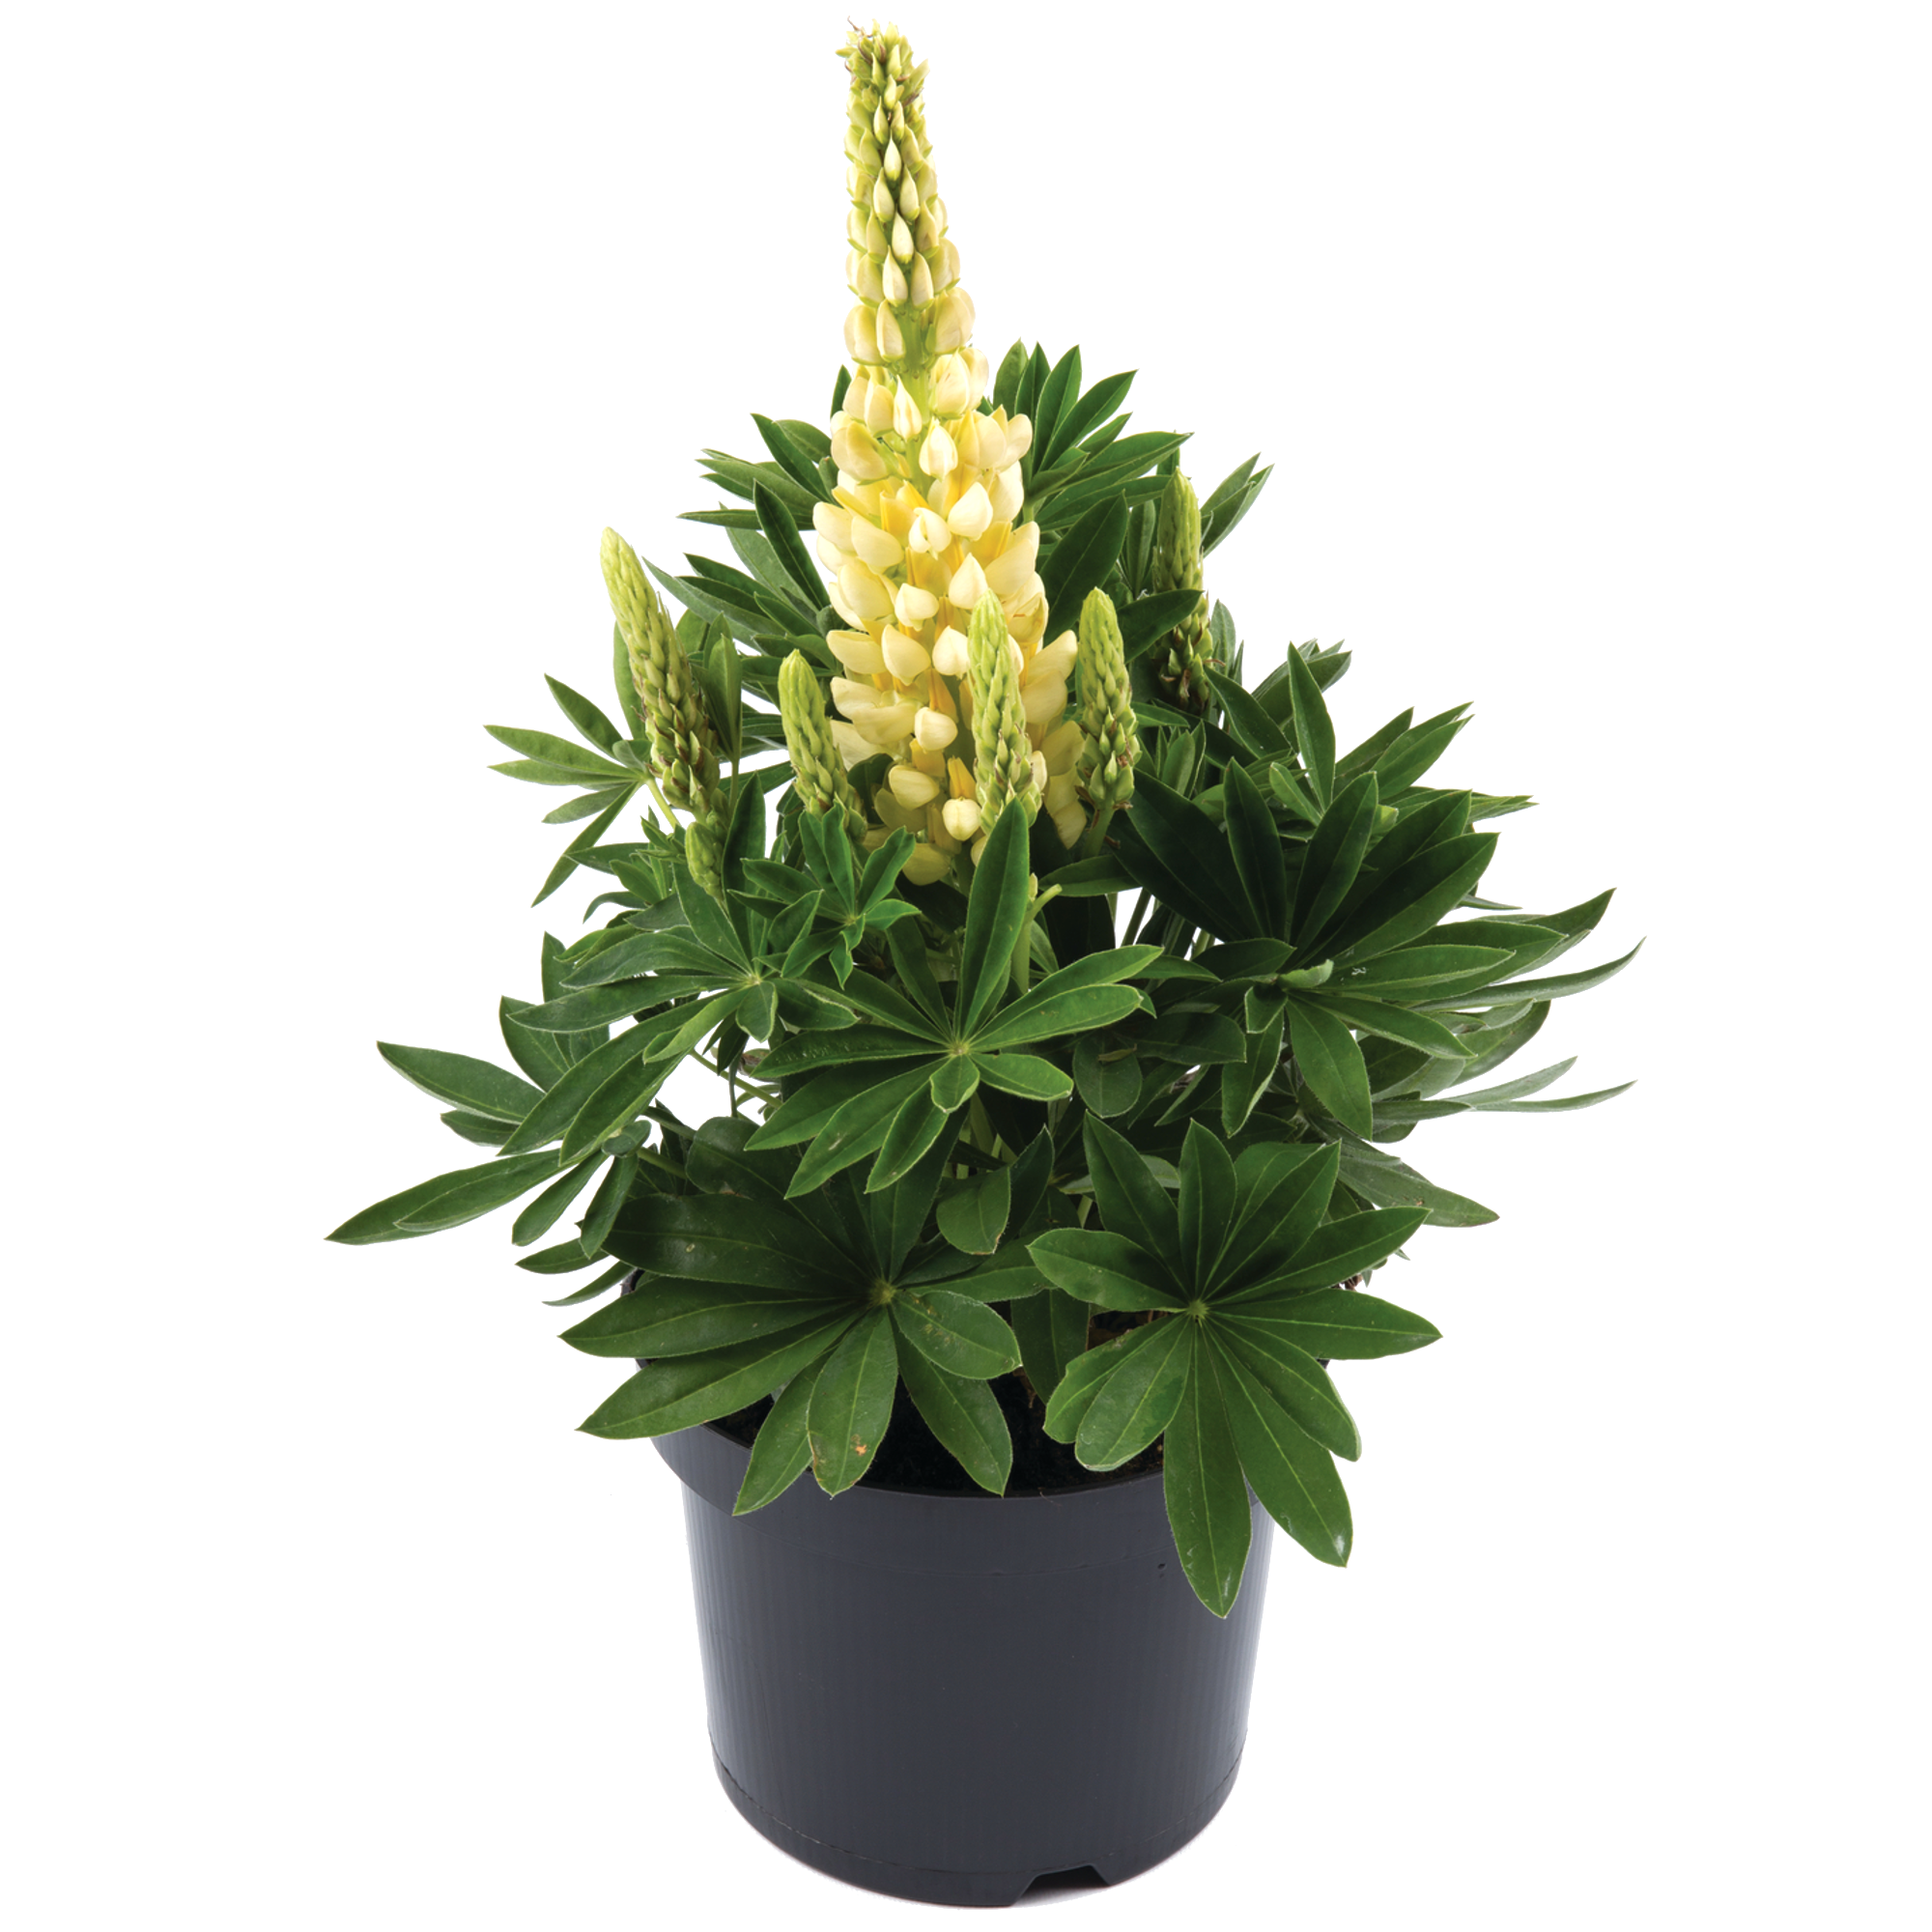 Lupine 'Gallery Yellow Shades' gelb 15 cm Topf + product picture